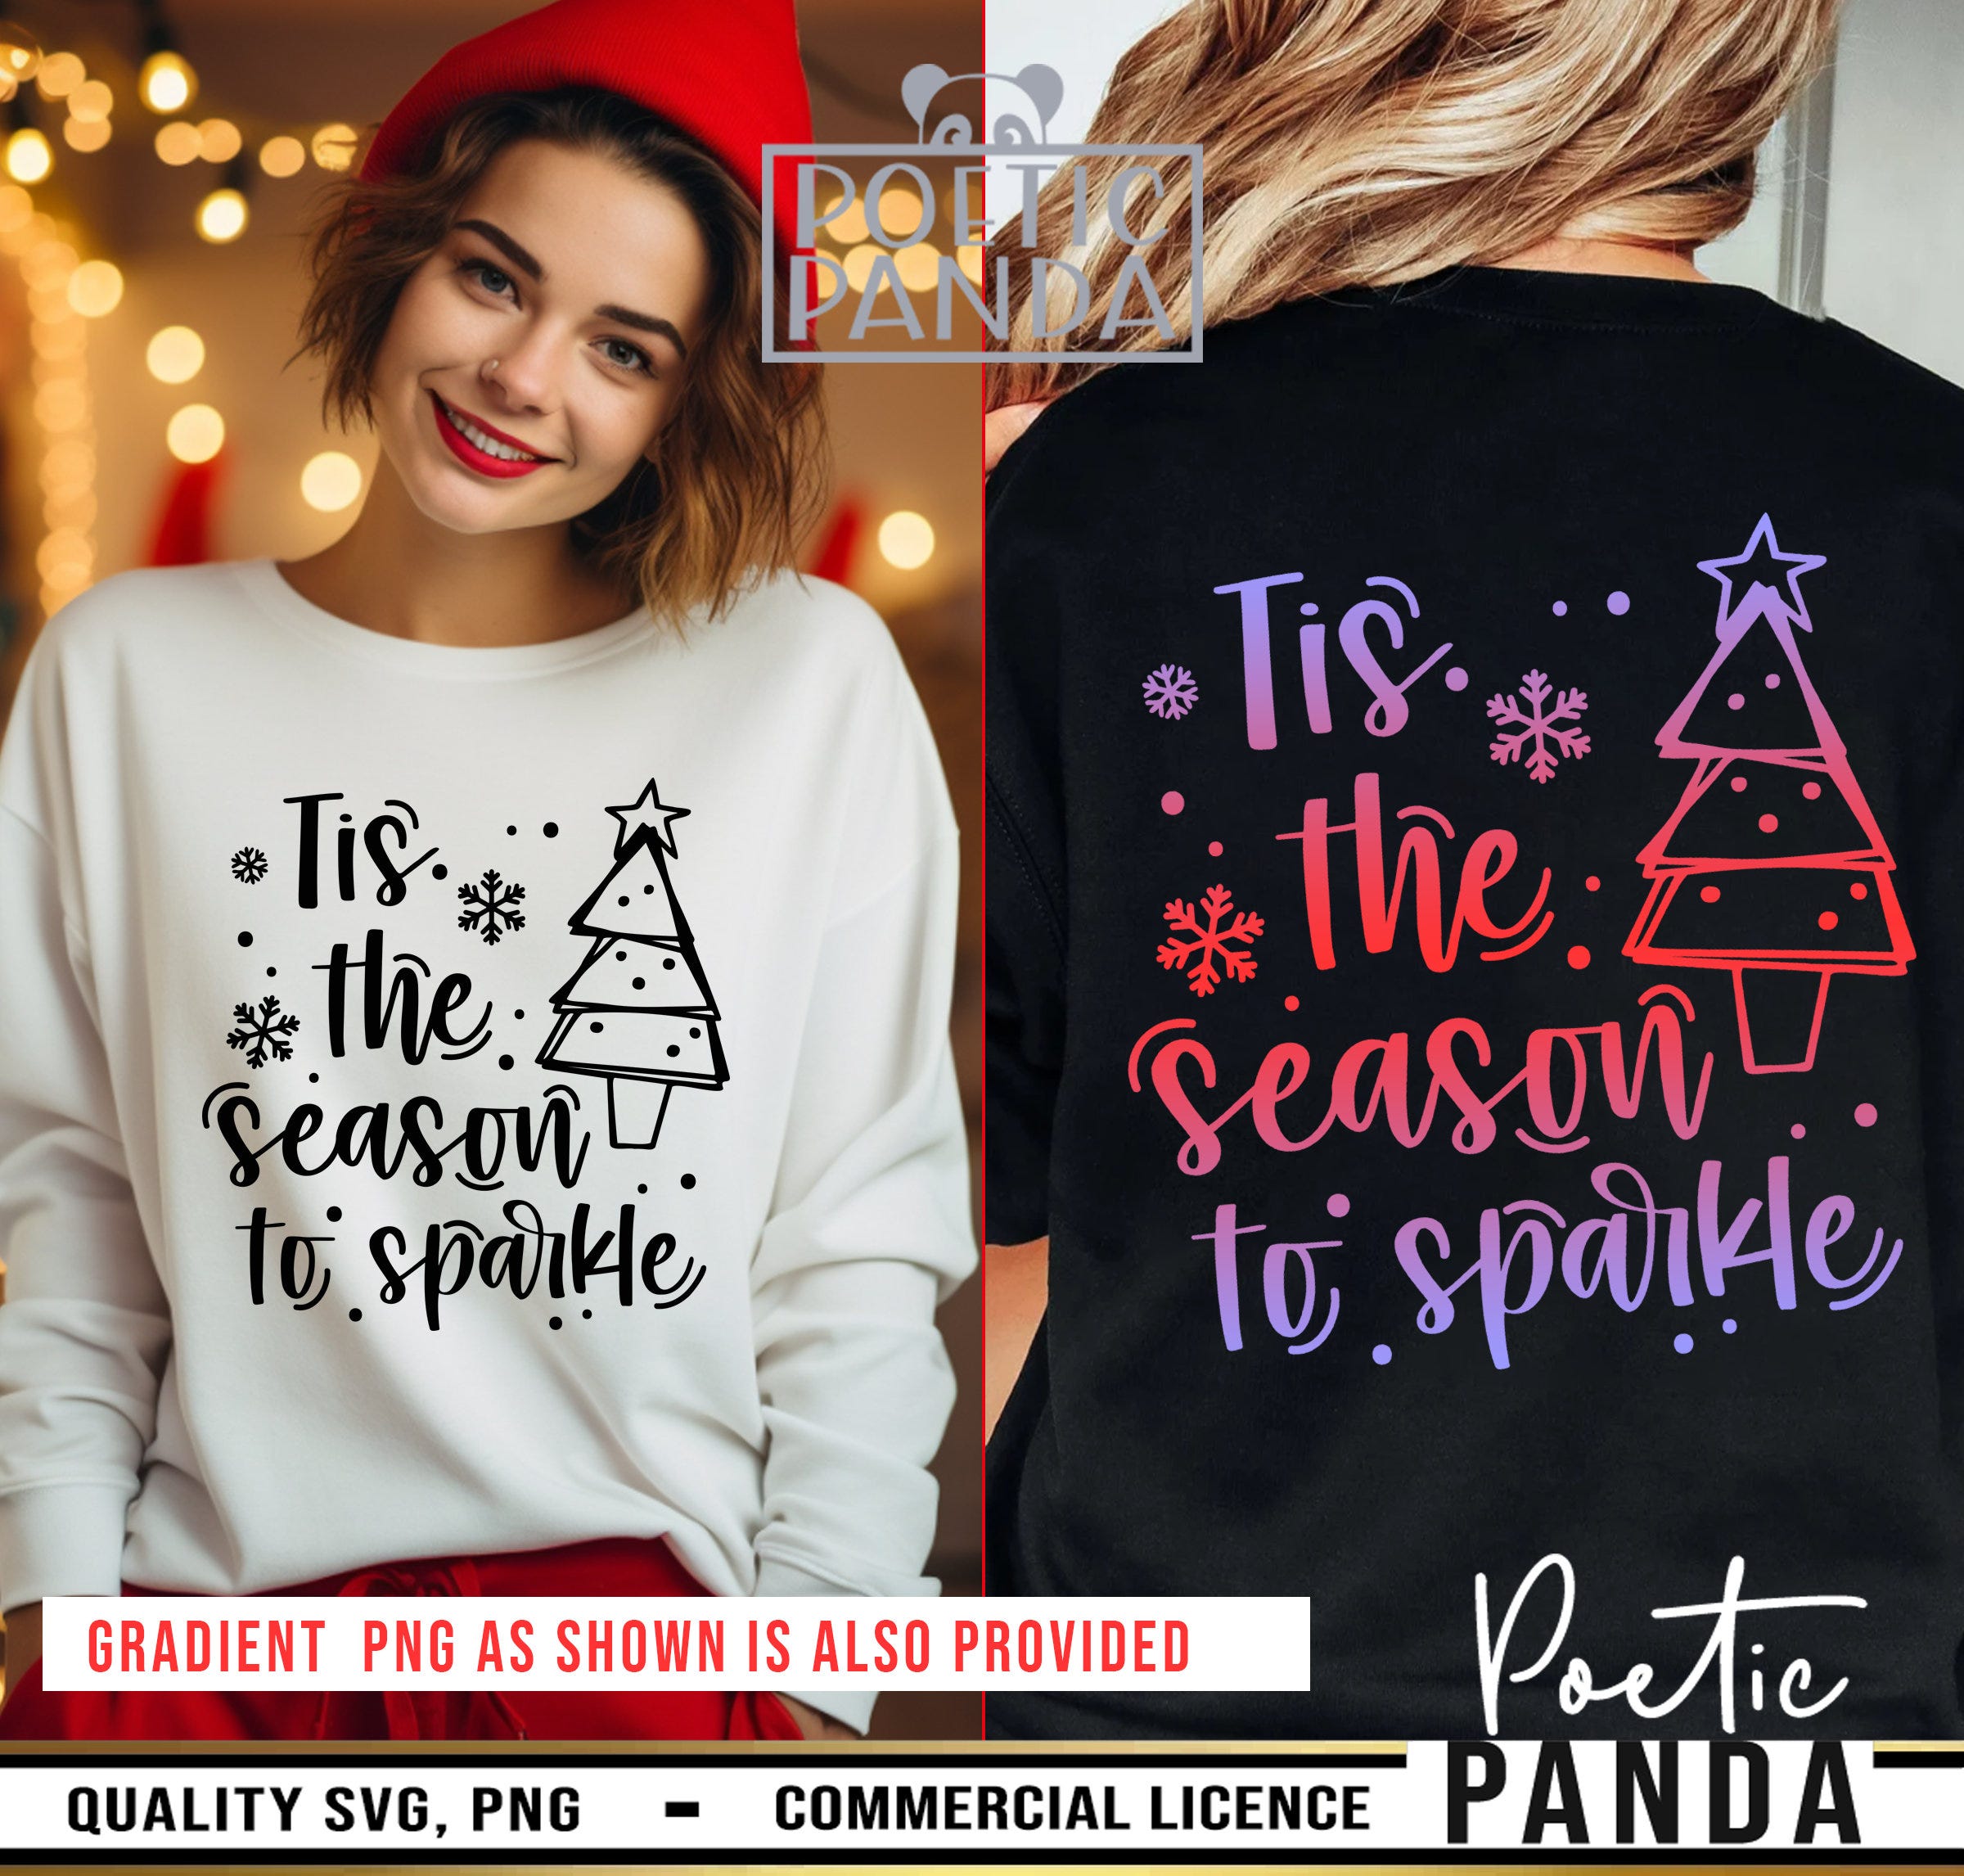 Tis The Season To Sparkle SVG PNG, Cute Christmas Shirt Svg, Christmas Svg Girl, Tis The Season Svg, Christmas Tree Svg, Sparkle Png